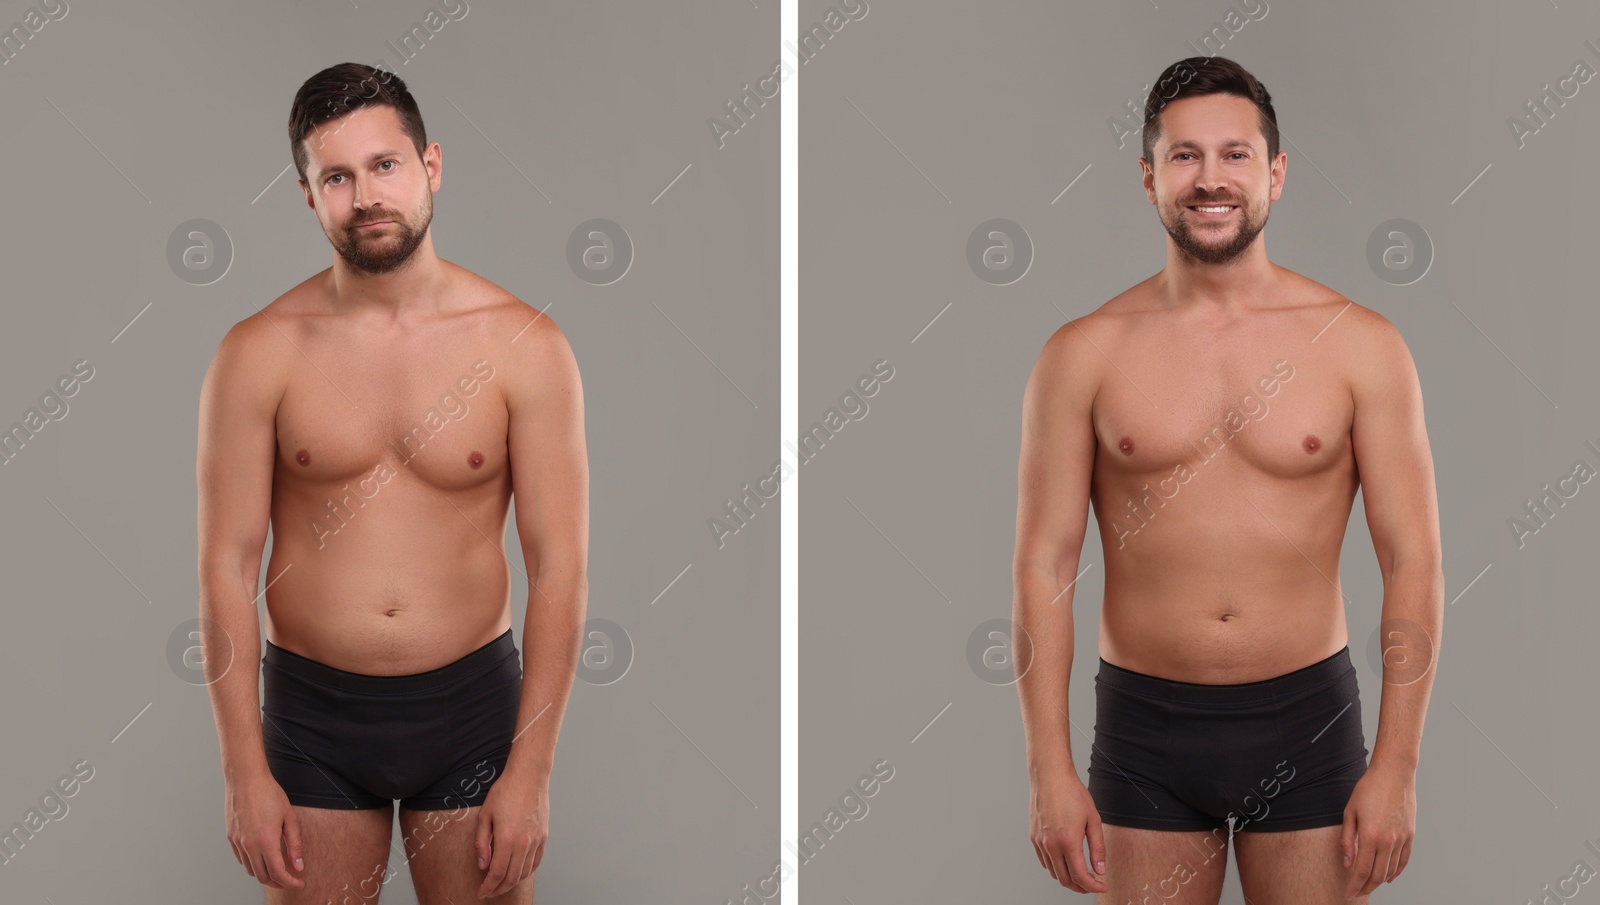 Image of Collage with portraits of man before and after weight loss on grey background